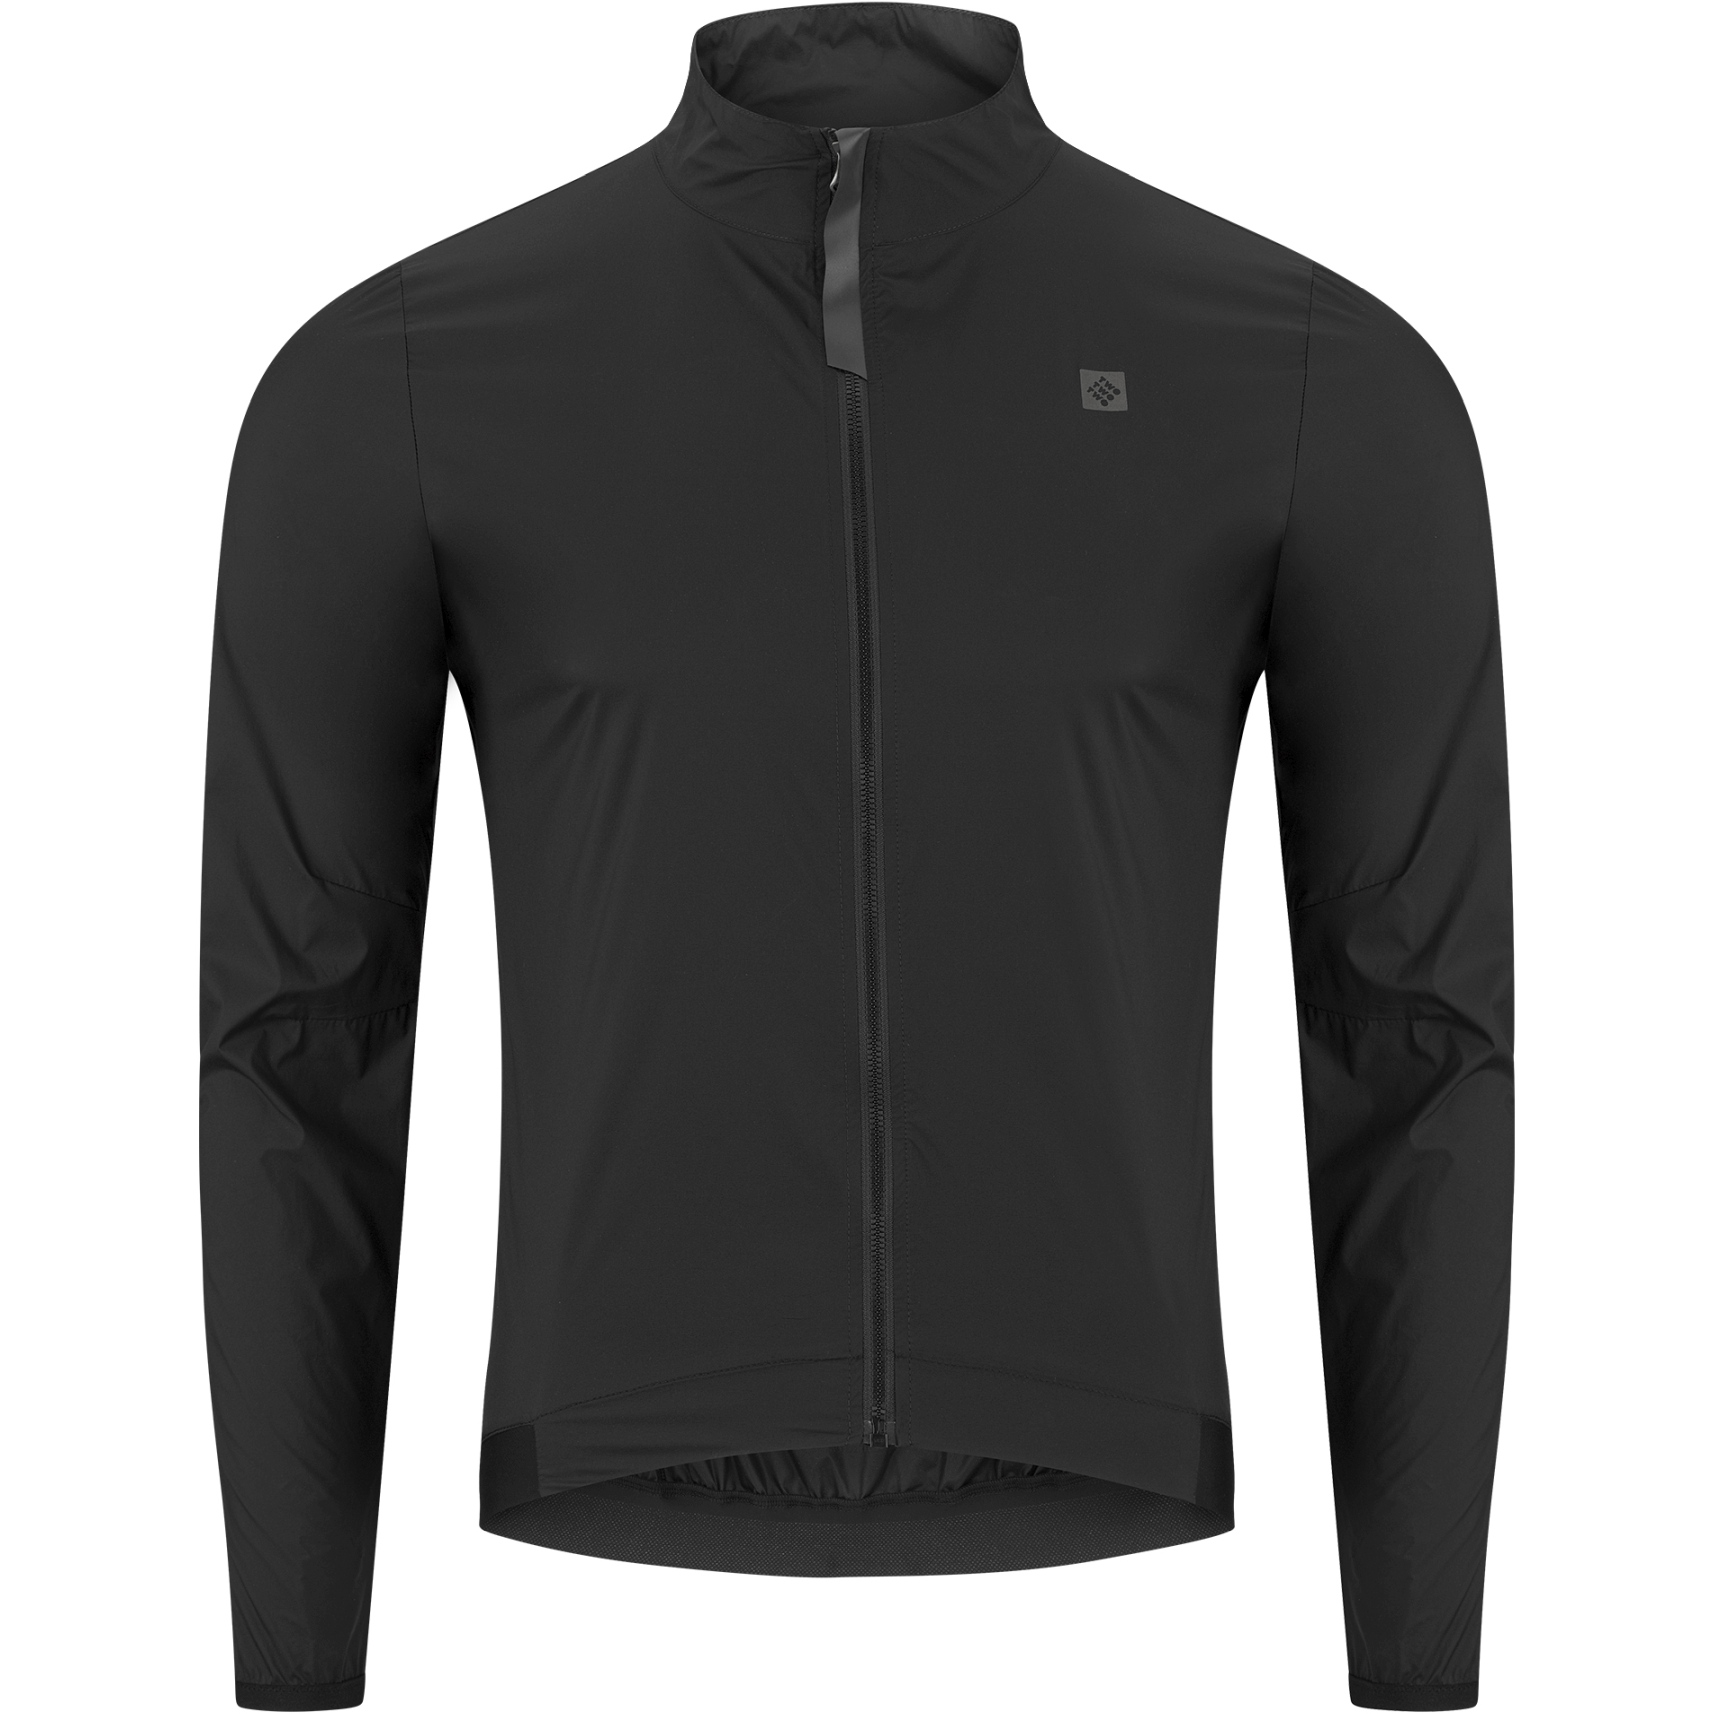 Picture of triple2 Kleen Pro Jacket - moonless night